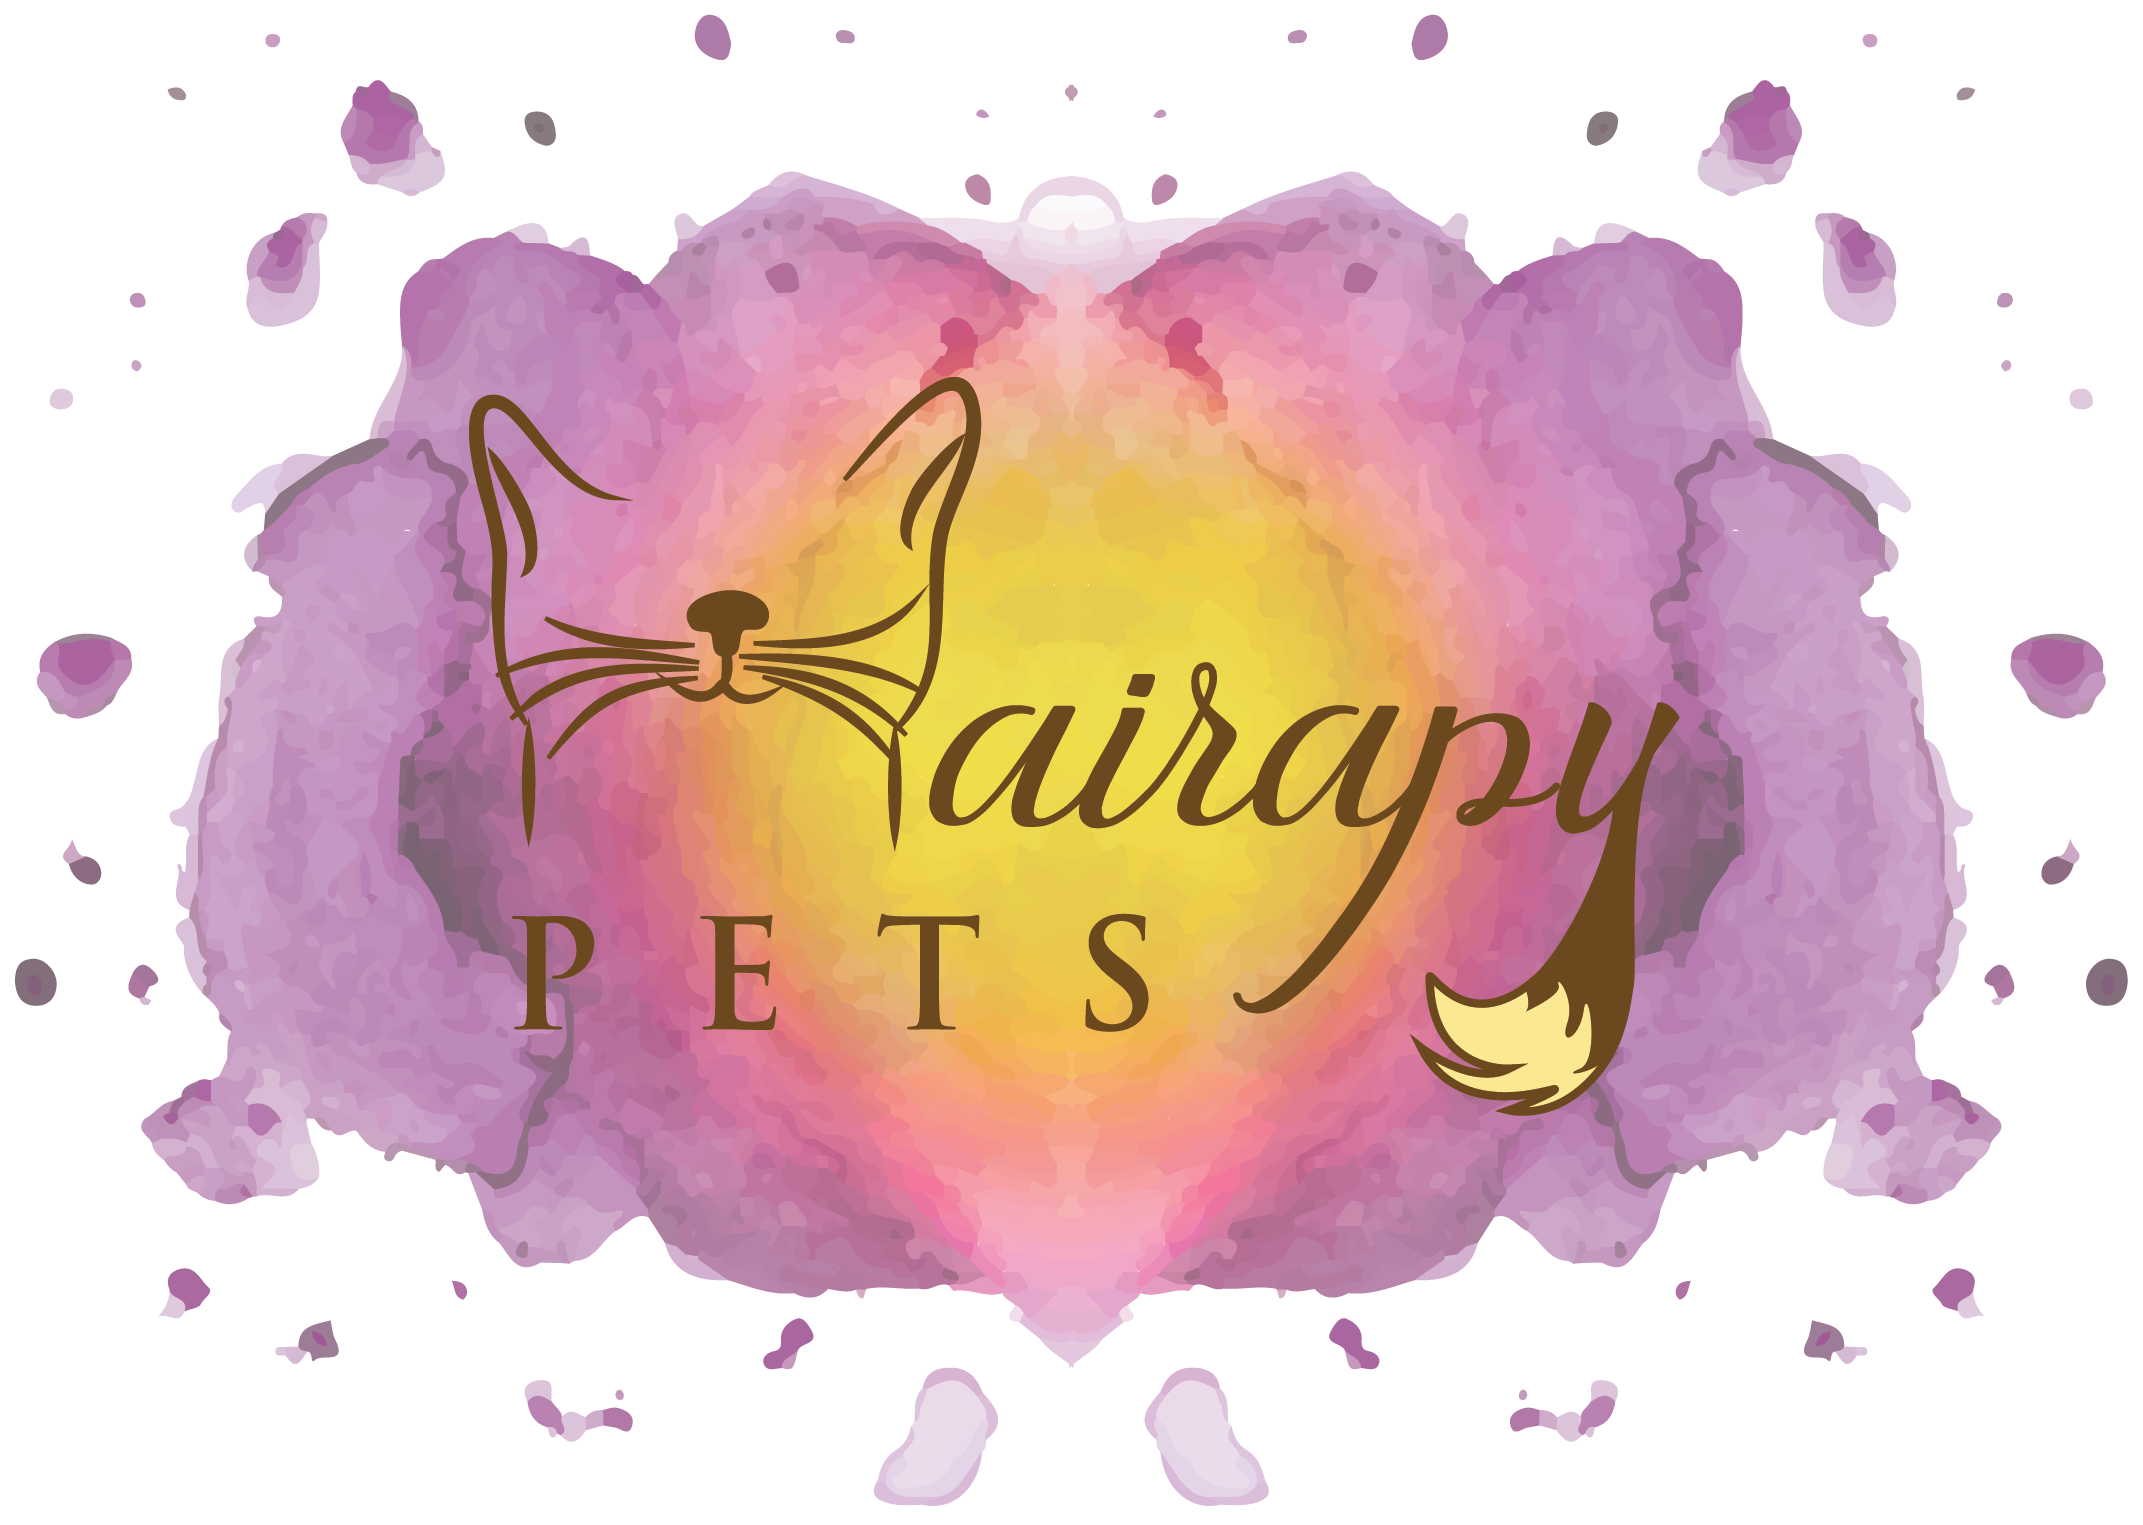 Hairapy Pets